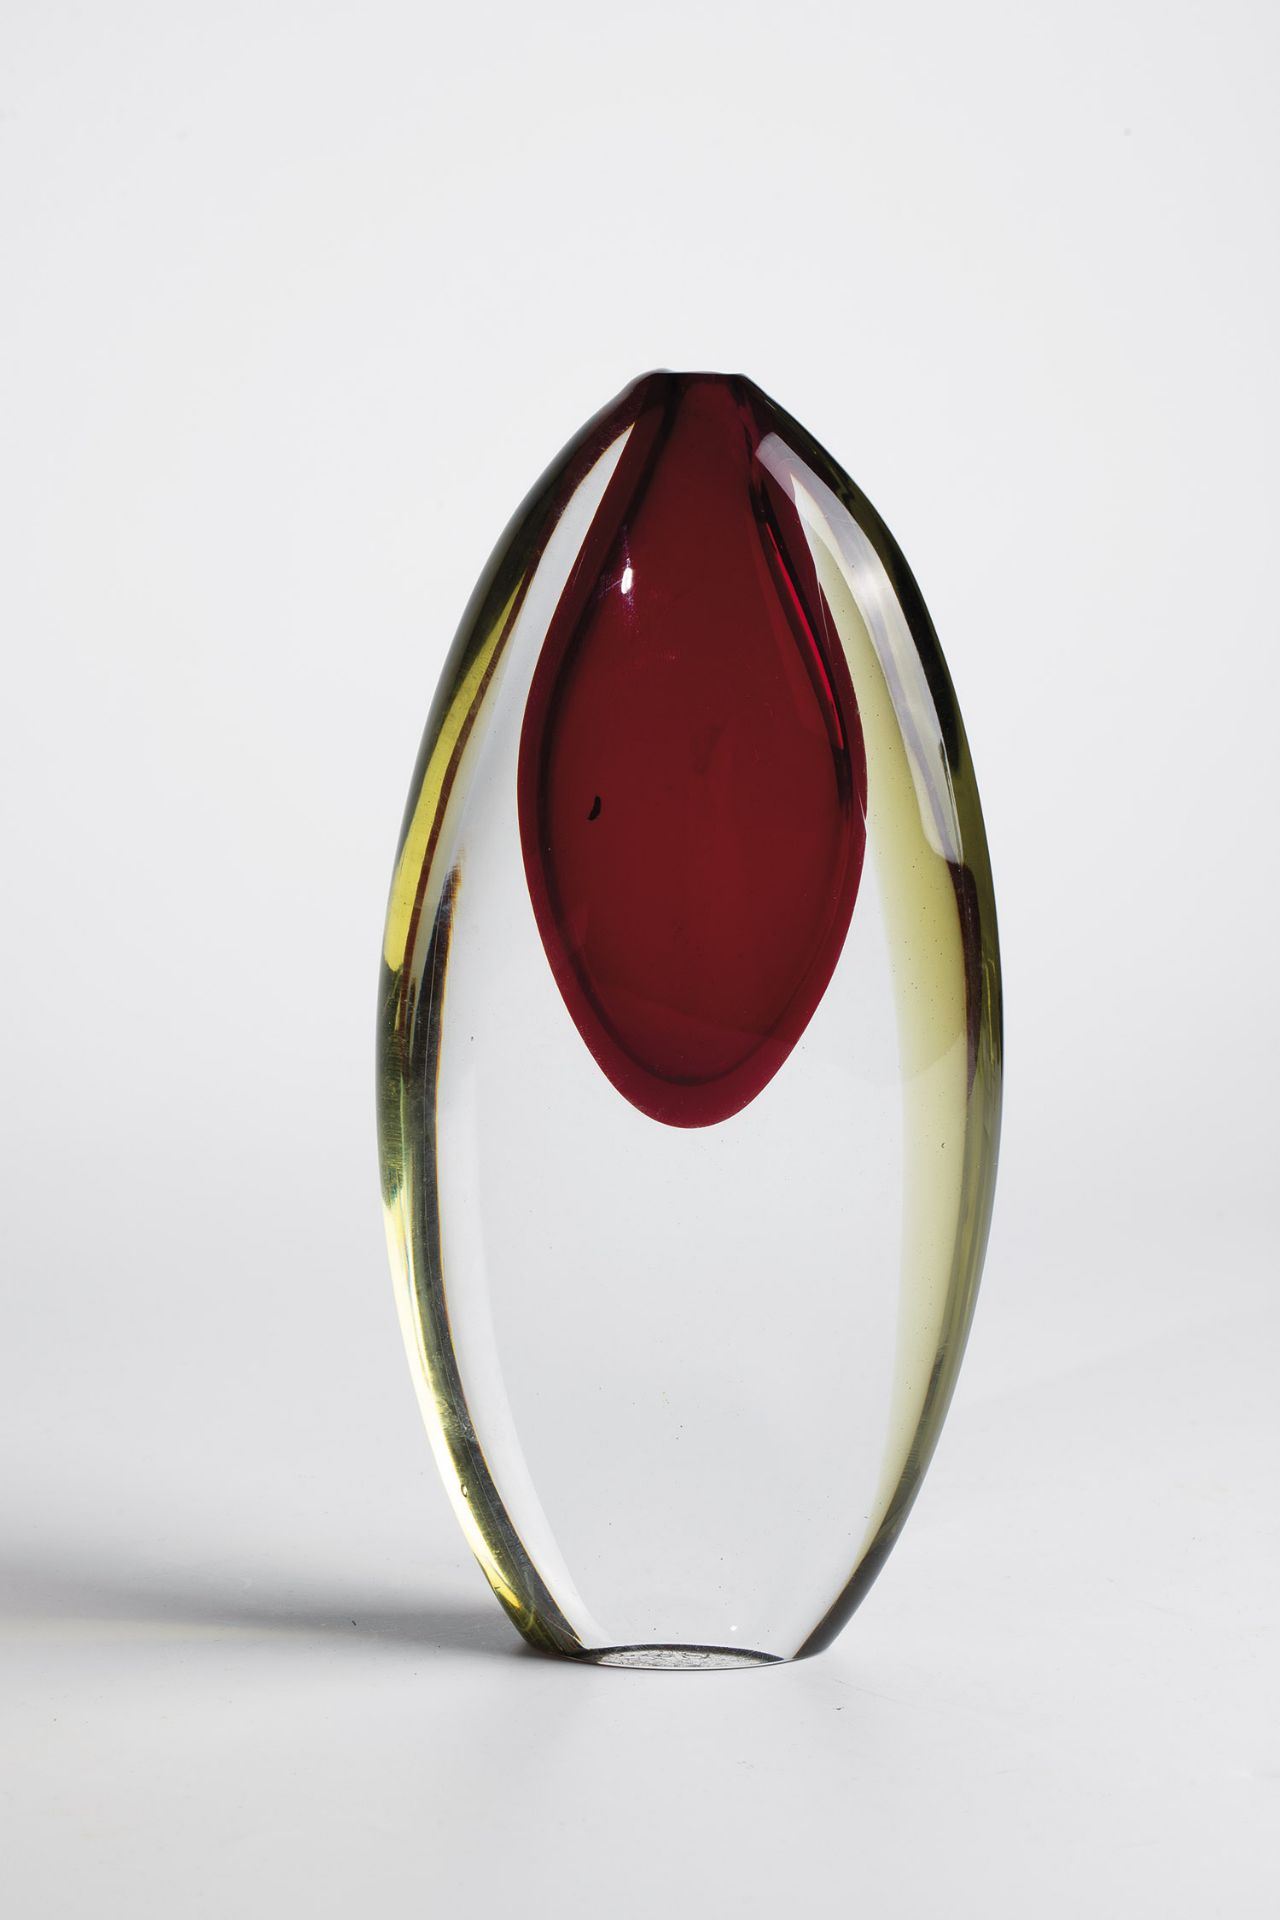 Vase ''Sasso Sommerso'' Alfredo Barbini, Murano, ca. 1962 Colourless glass with ruby red and honey